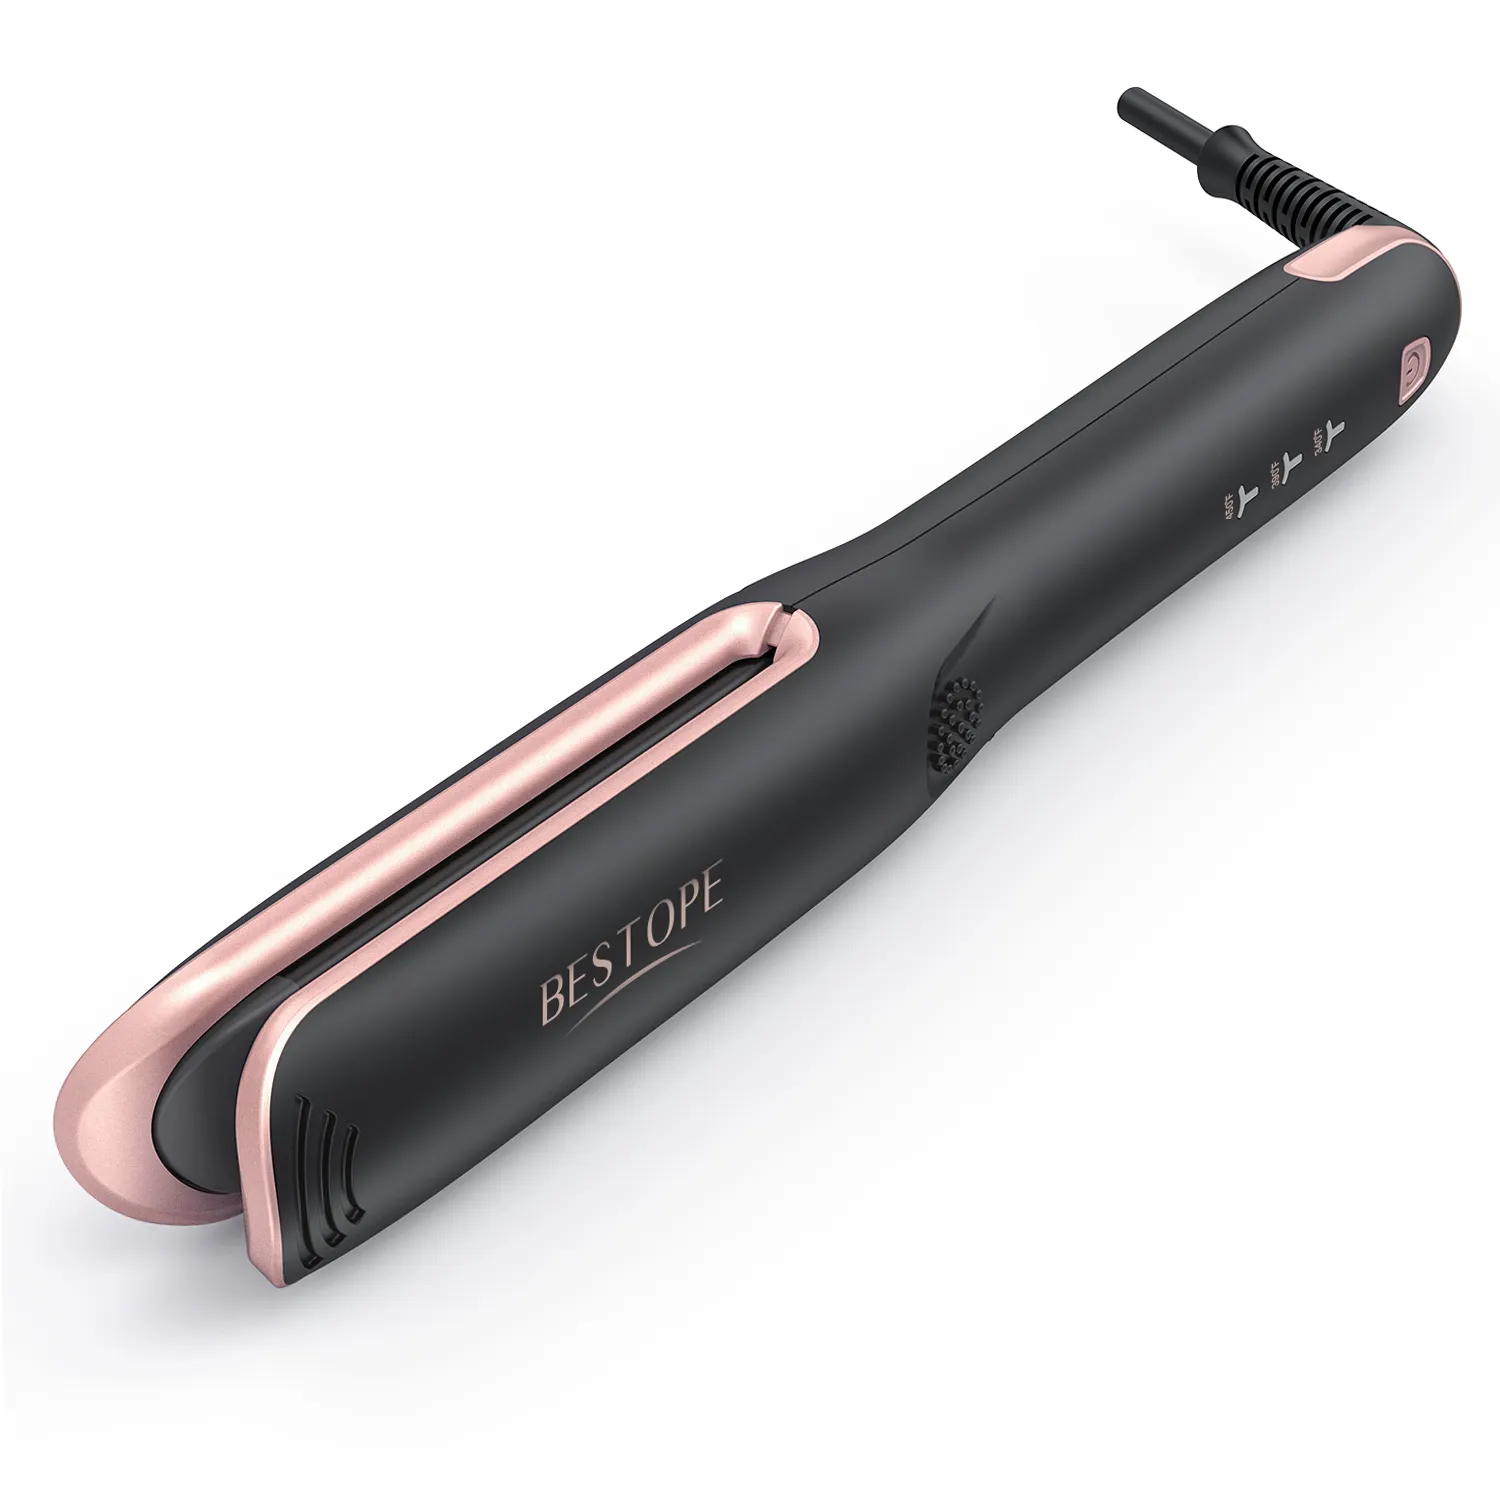 Bestope cordless mini iron professional travelling power banks chargers ceramic flat iron professional portable hair straighter